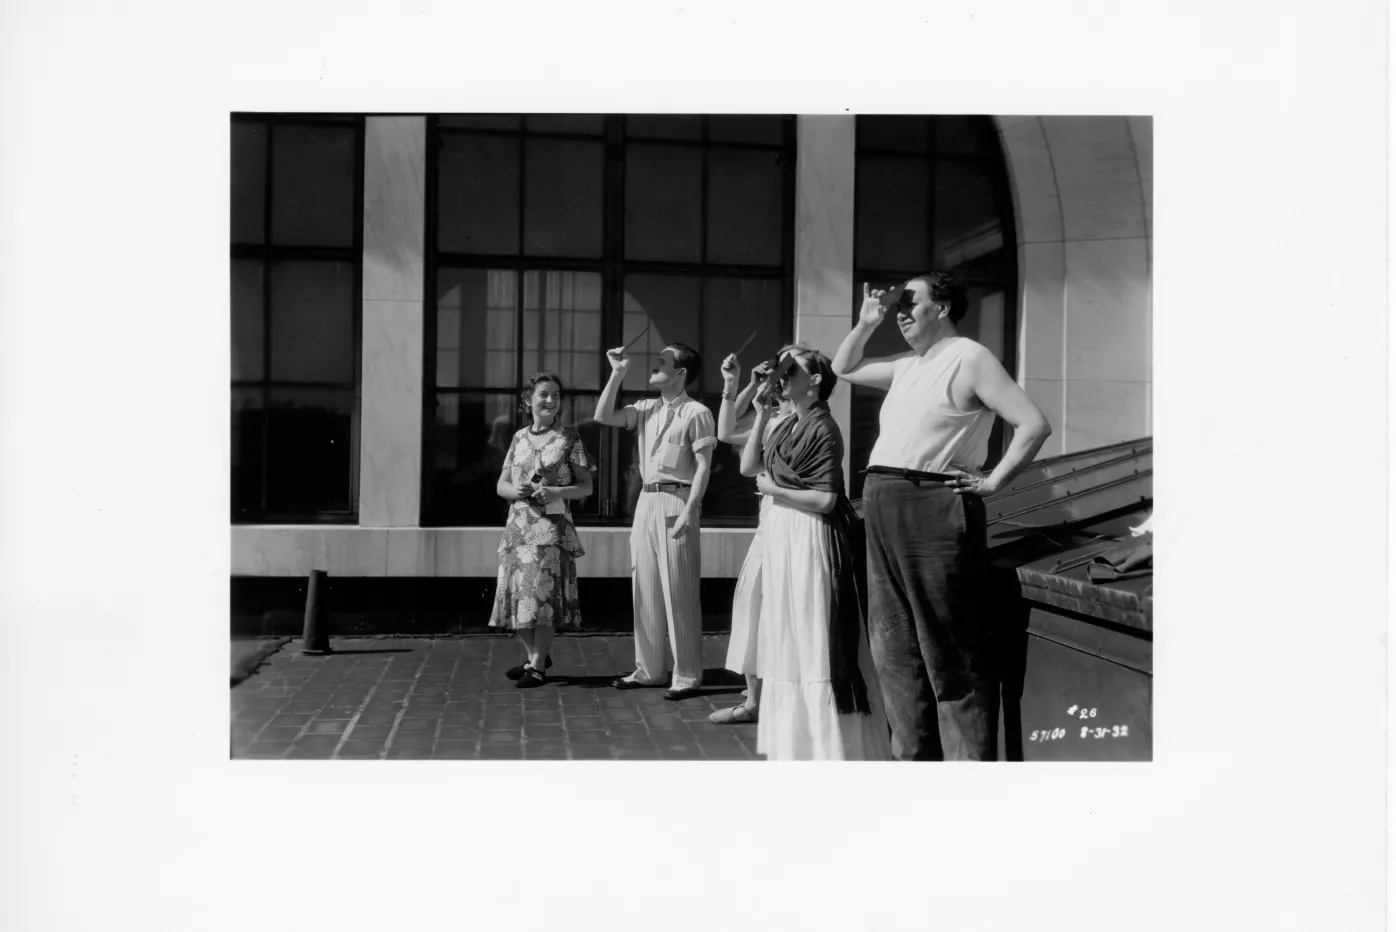 Diego Rivera and Frida Kahlo observing an Eclipse on the roof of the DIA